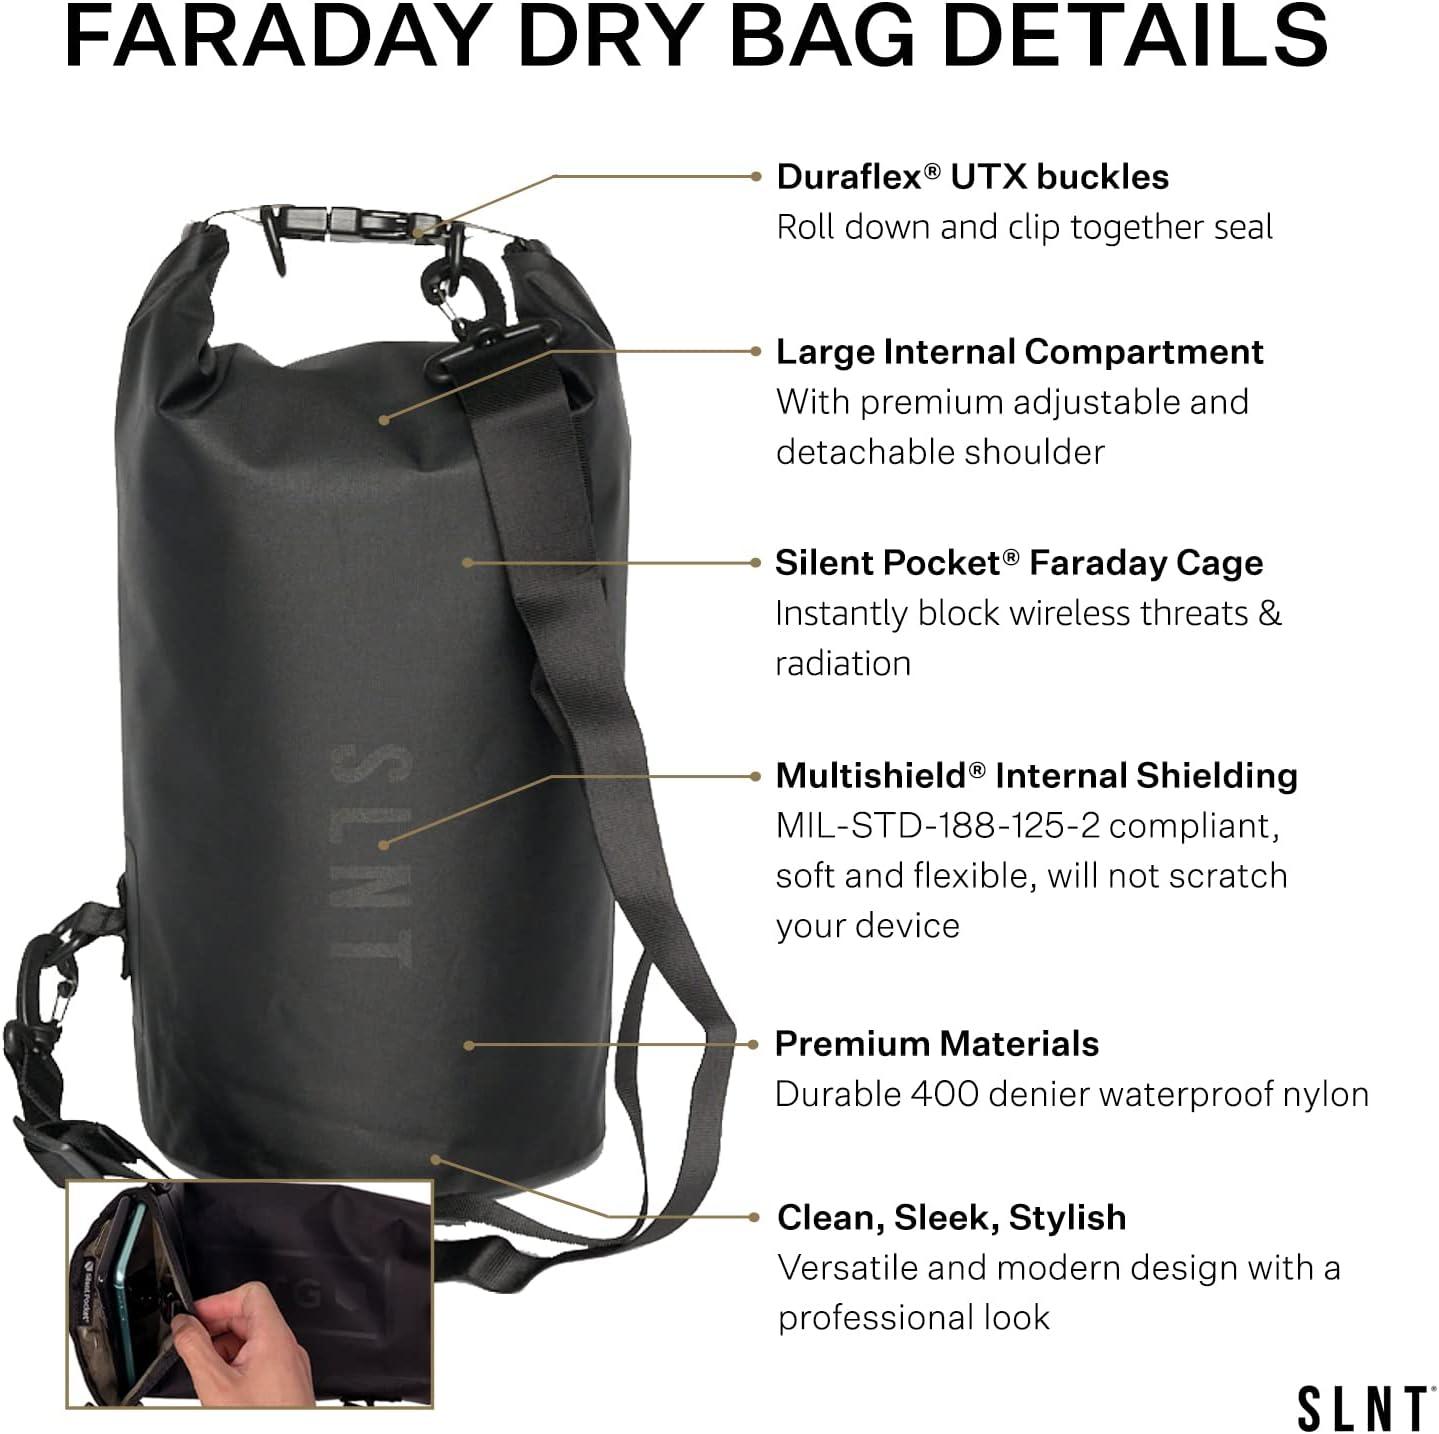 Faraday Dry Bag for Laptop - Waterproof and Signal-Proof - Enhance Your Privacy & Security - Silent Pocket